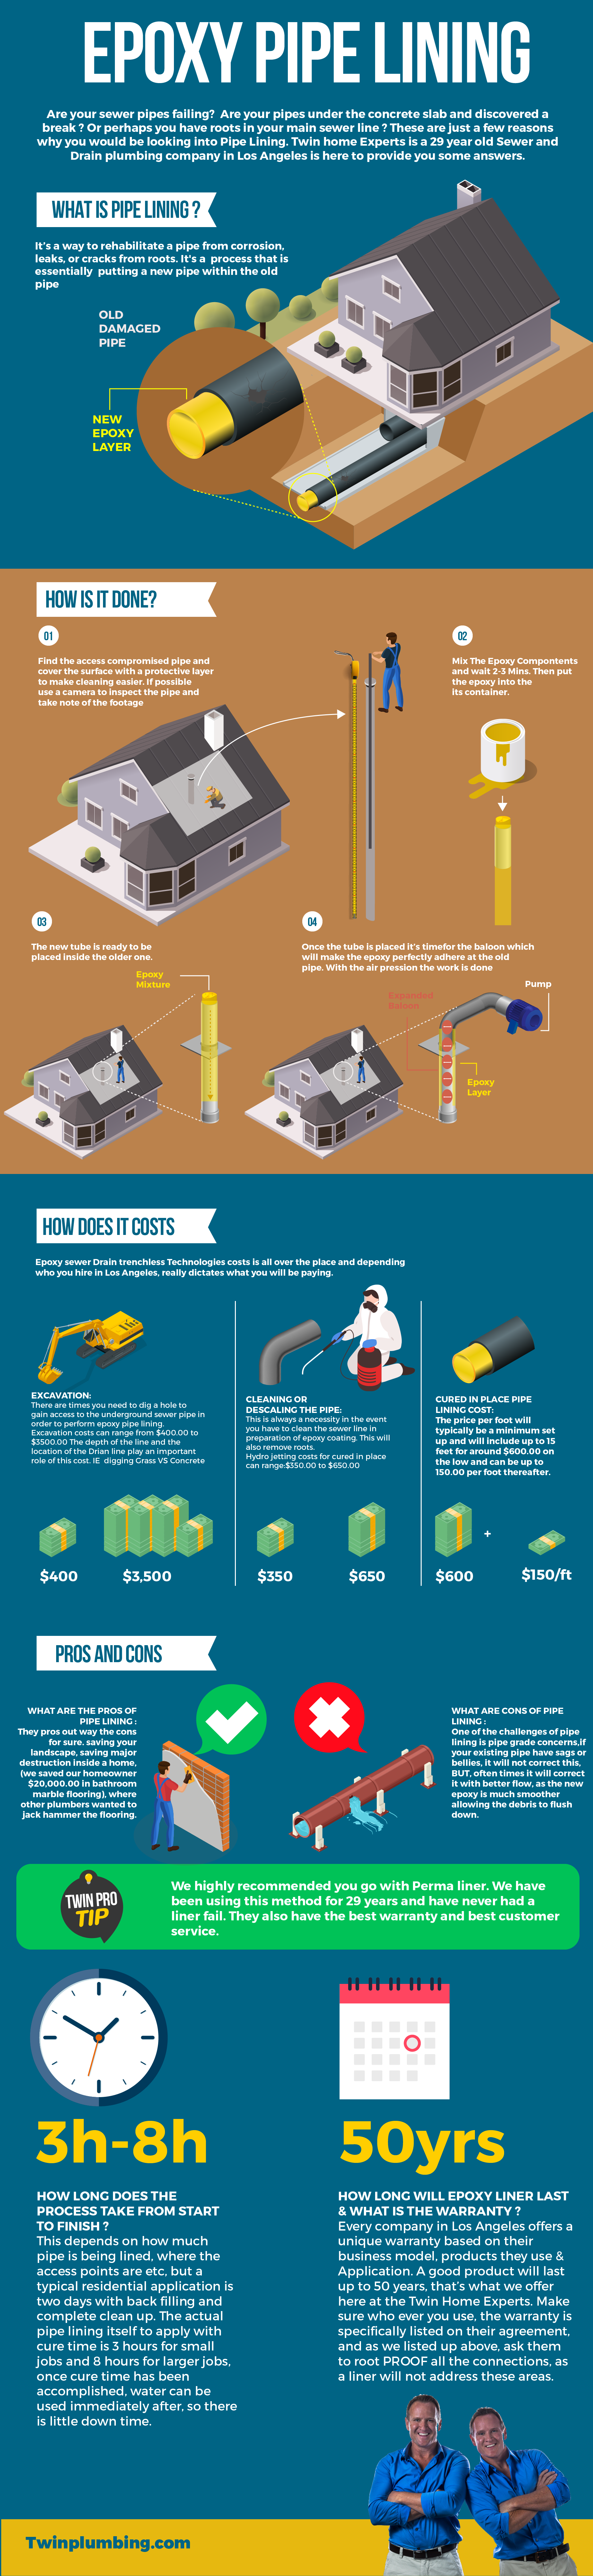 epoxy-pipe-lining-infographic